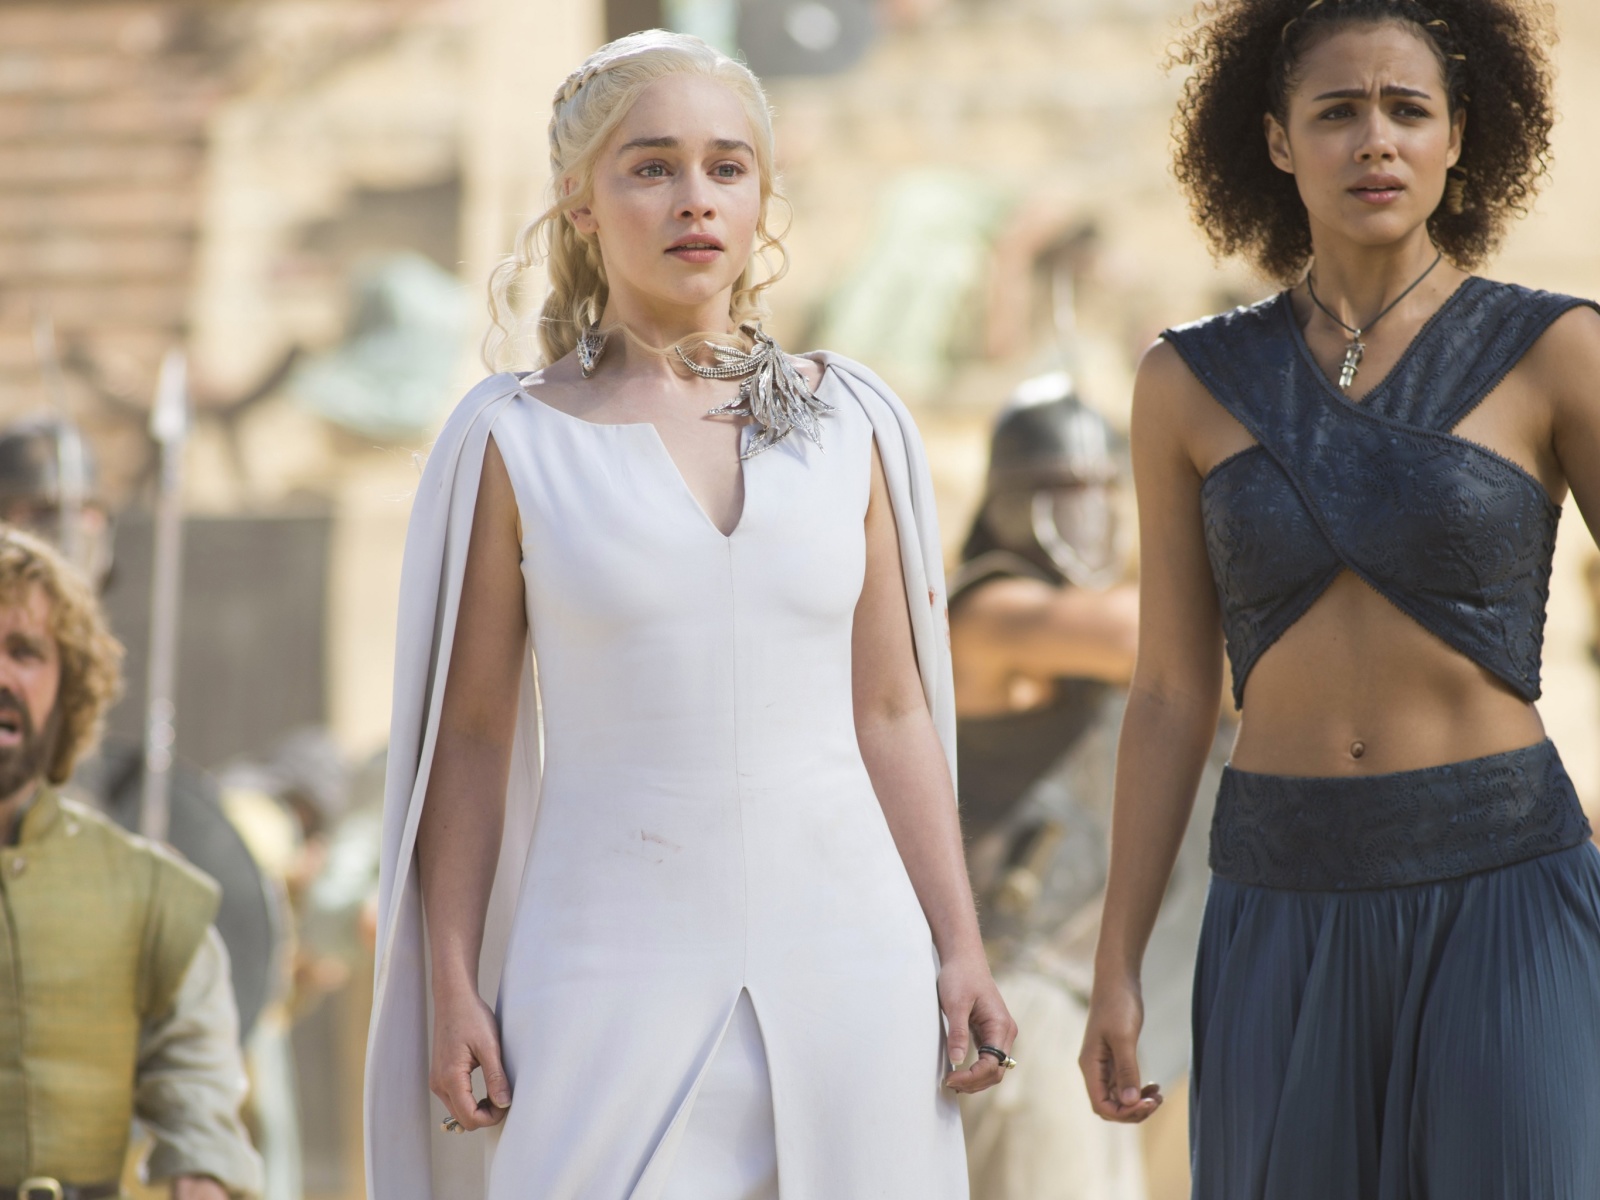 Game Of Thrones Emilia Clarke and Nathalie Emmanuel as Missandei wallpaper 1600x1200